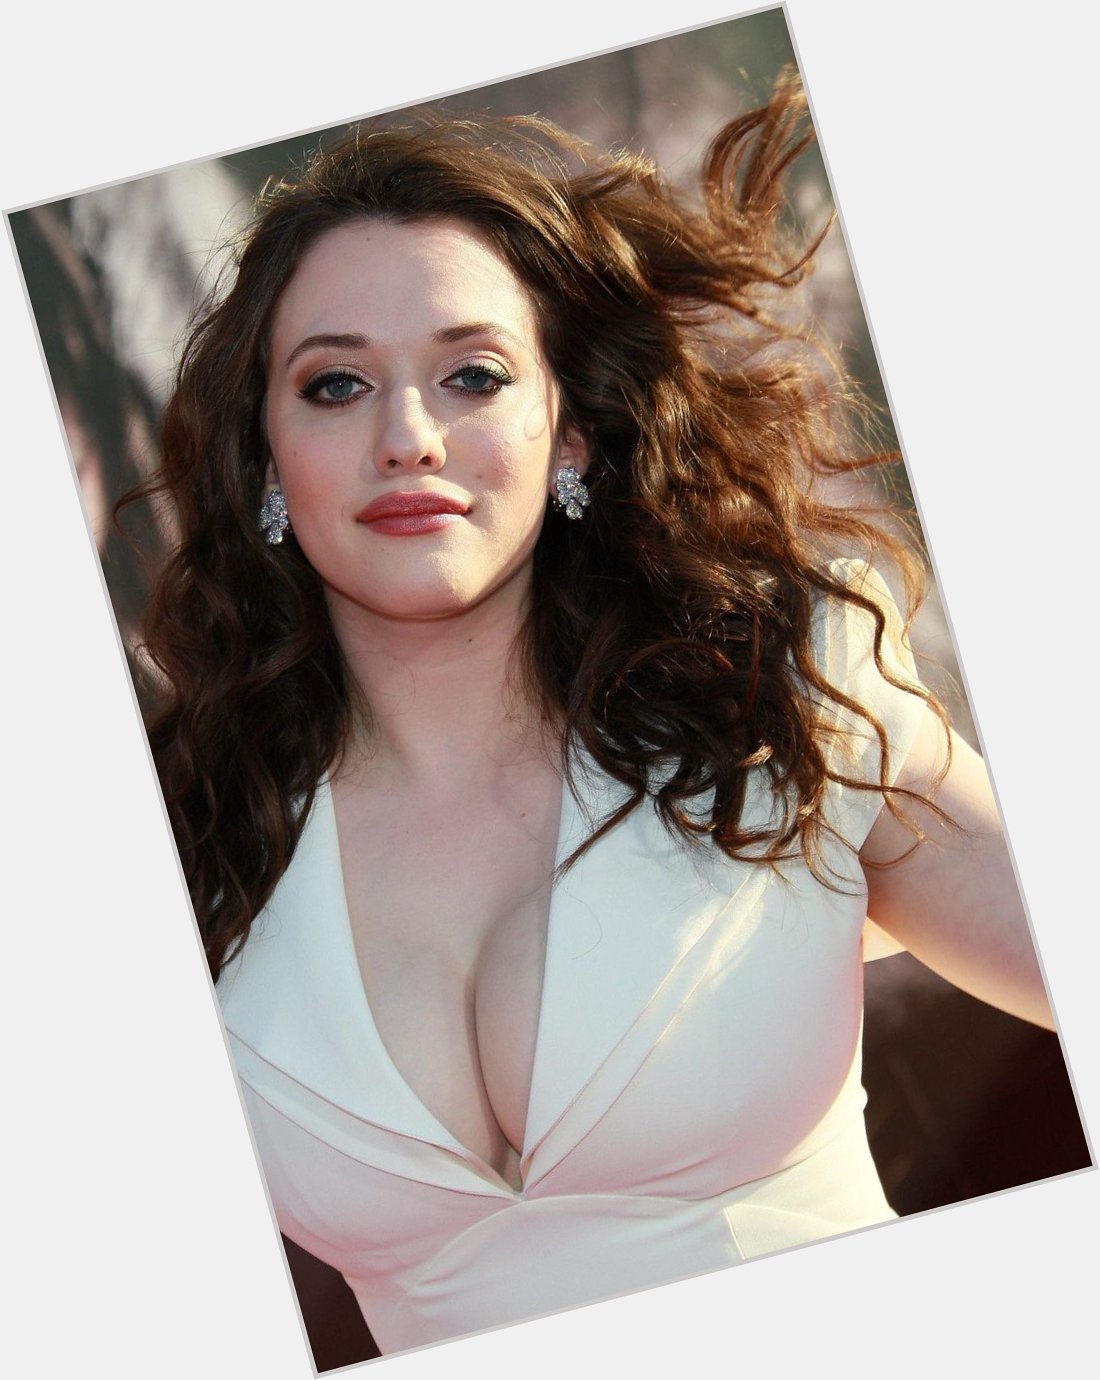  Happy 34th birthday to the delightful Kat Dennings  